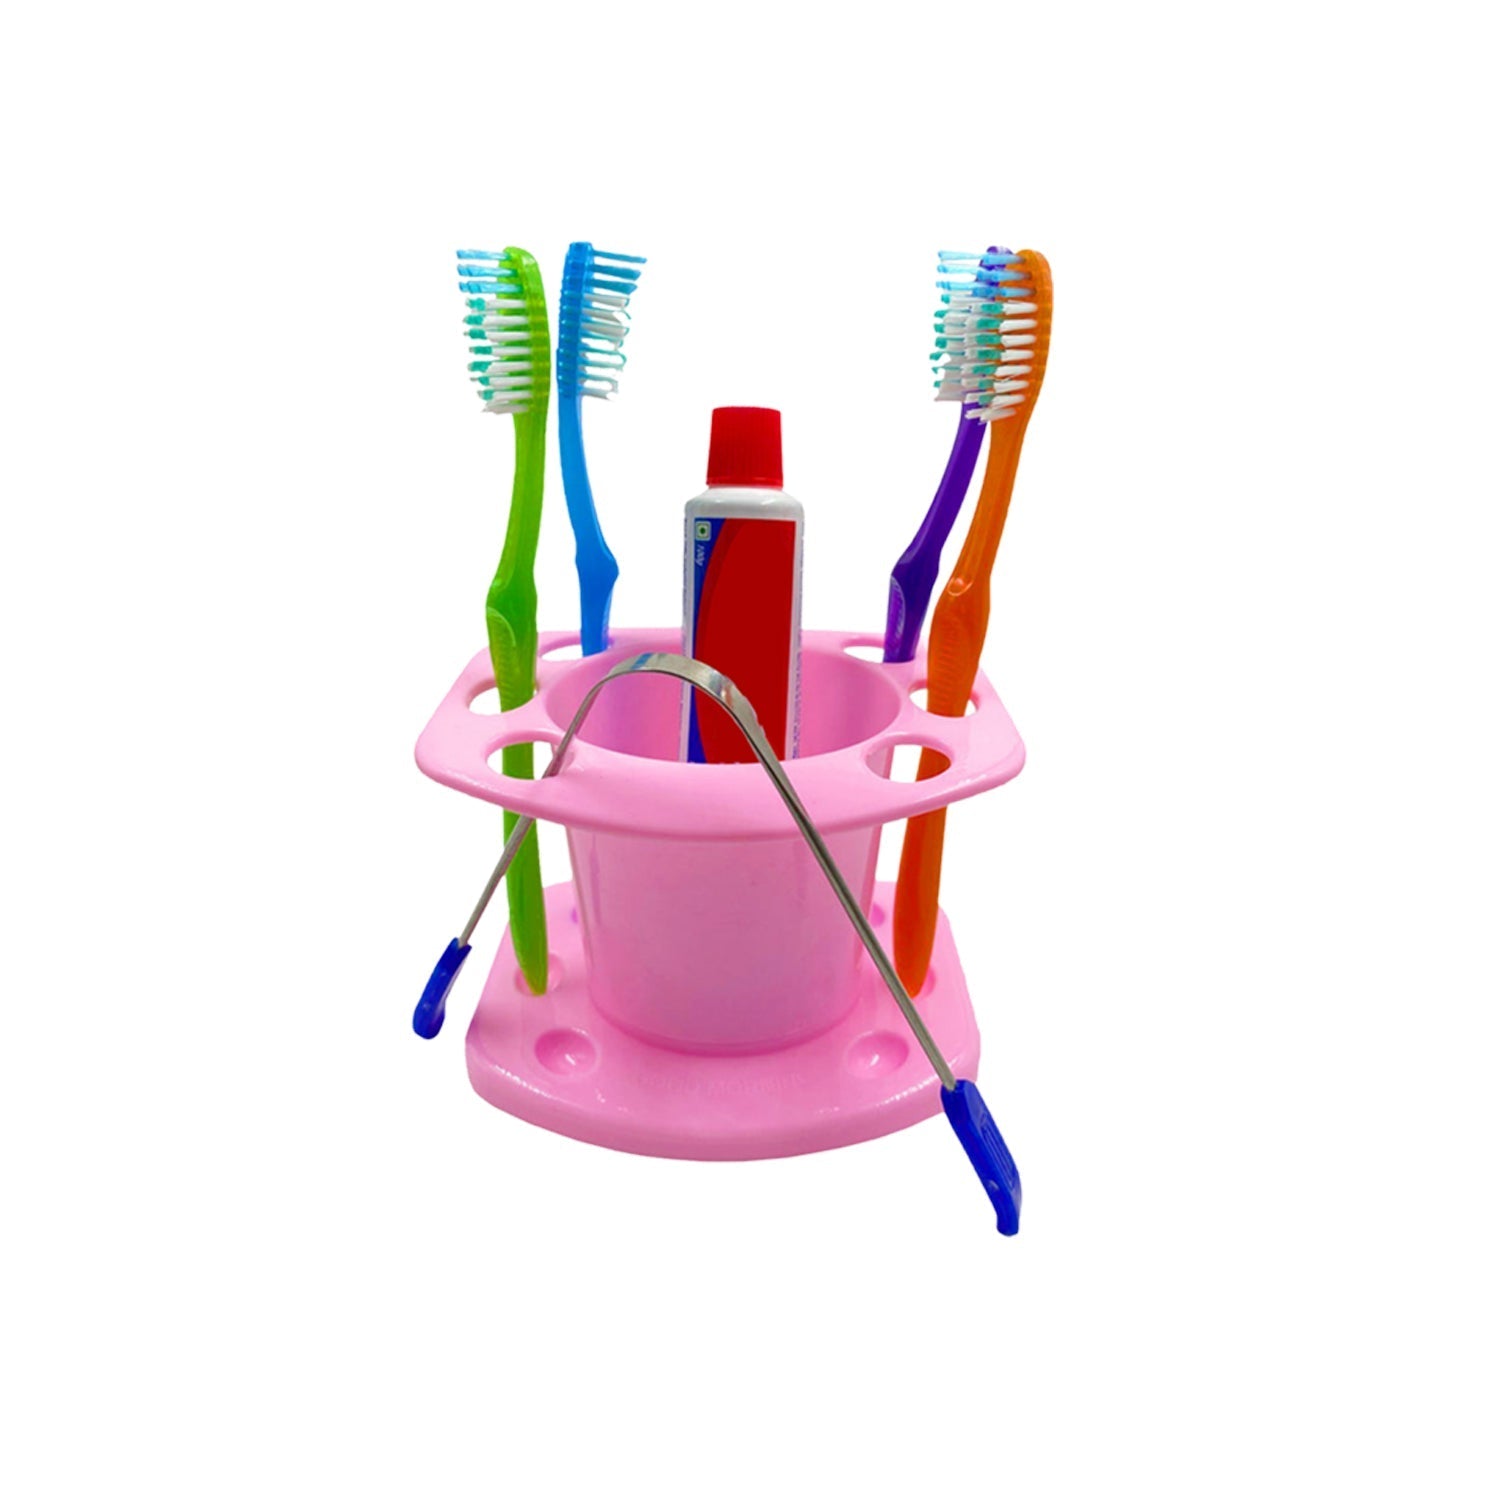 3689 Toothbrush Holder widely used in all types of bathroom places for holding and storing toothbrushes and toothpastes of all types of family members etc. DeoDap